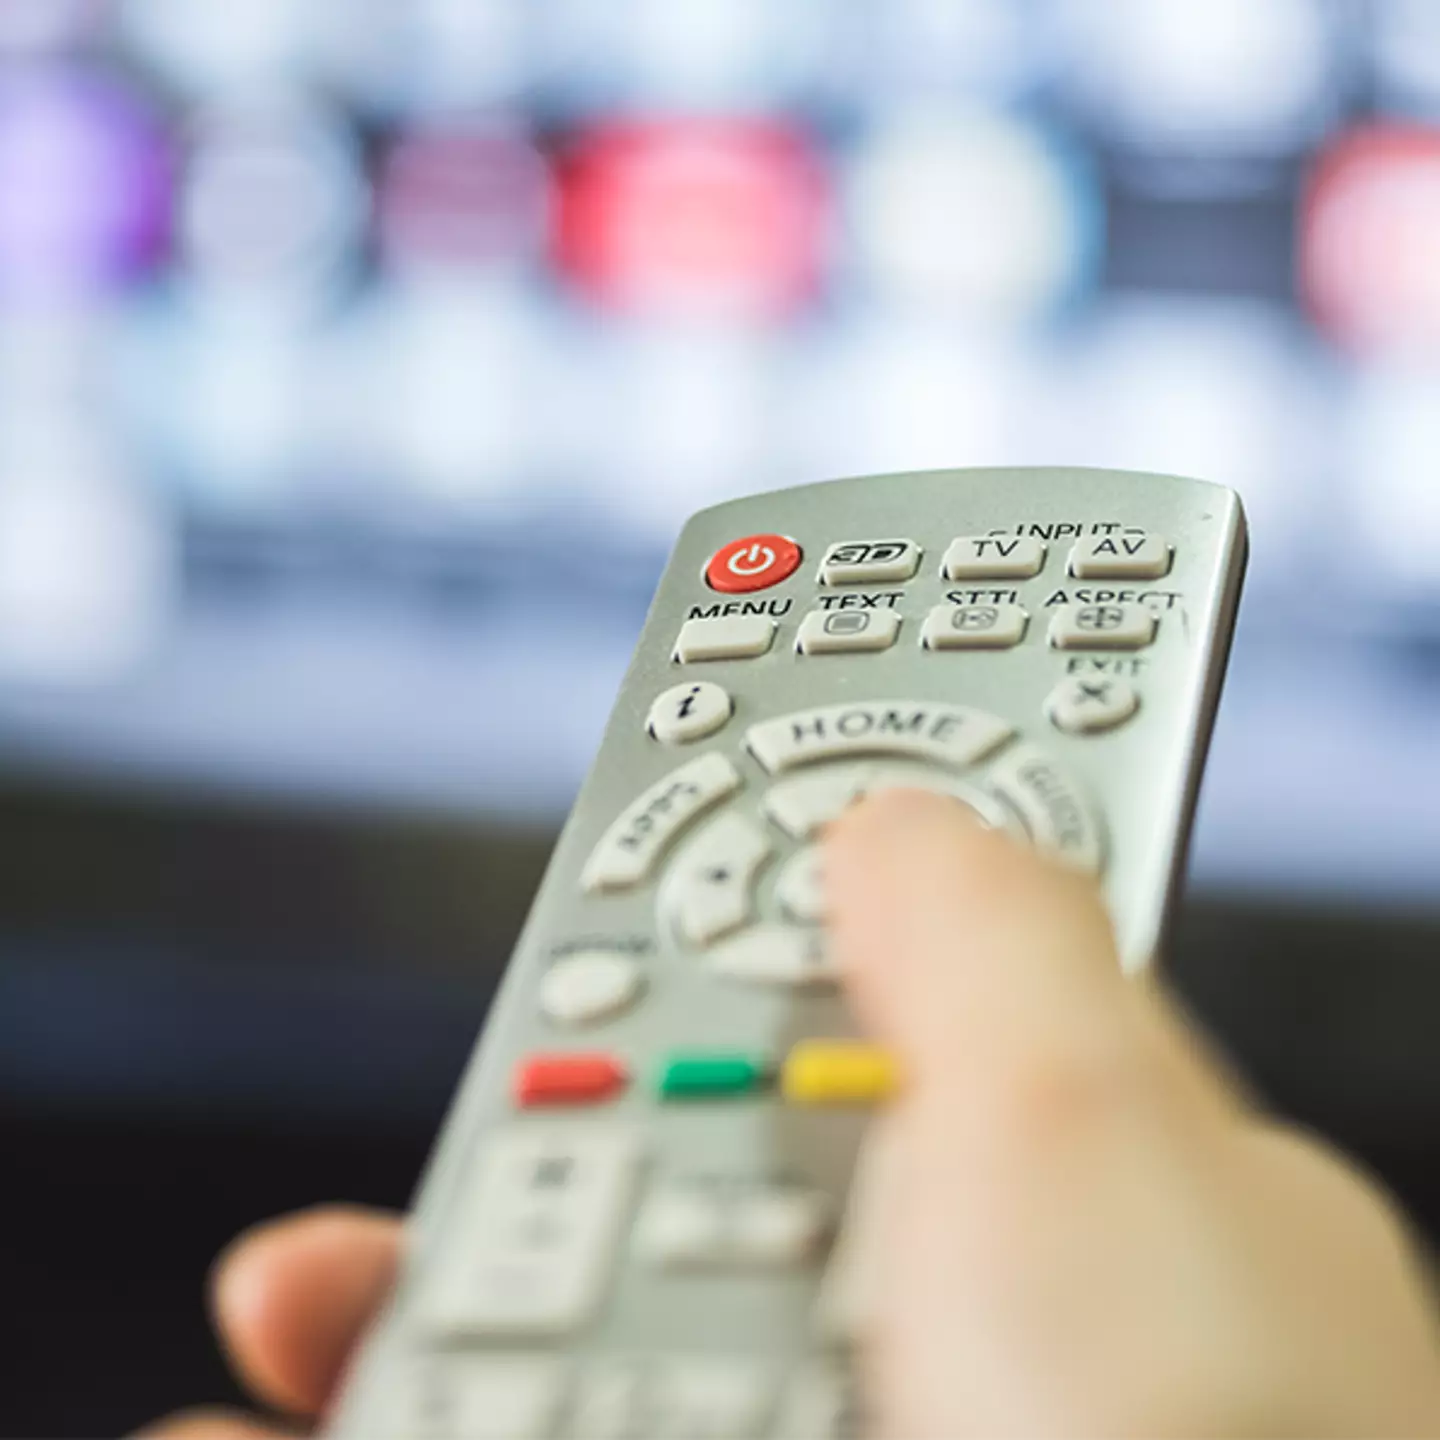 Homes urged to ‘act now’ to avoid losing TV channels in final warning